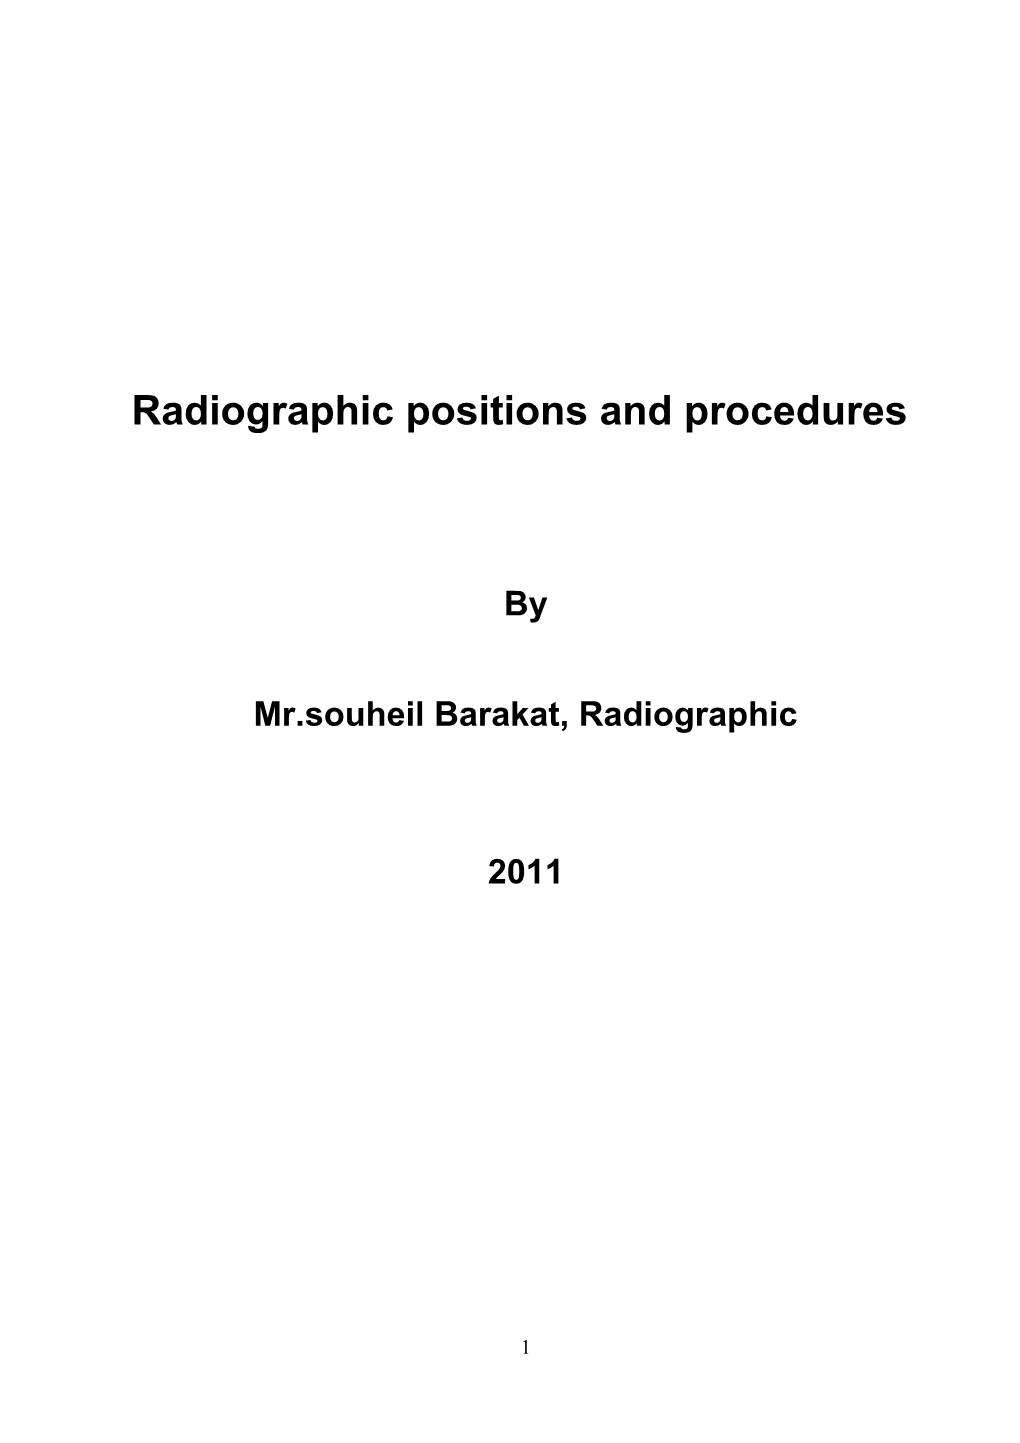 Radiographic Positions and Procedures